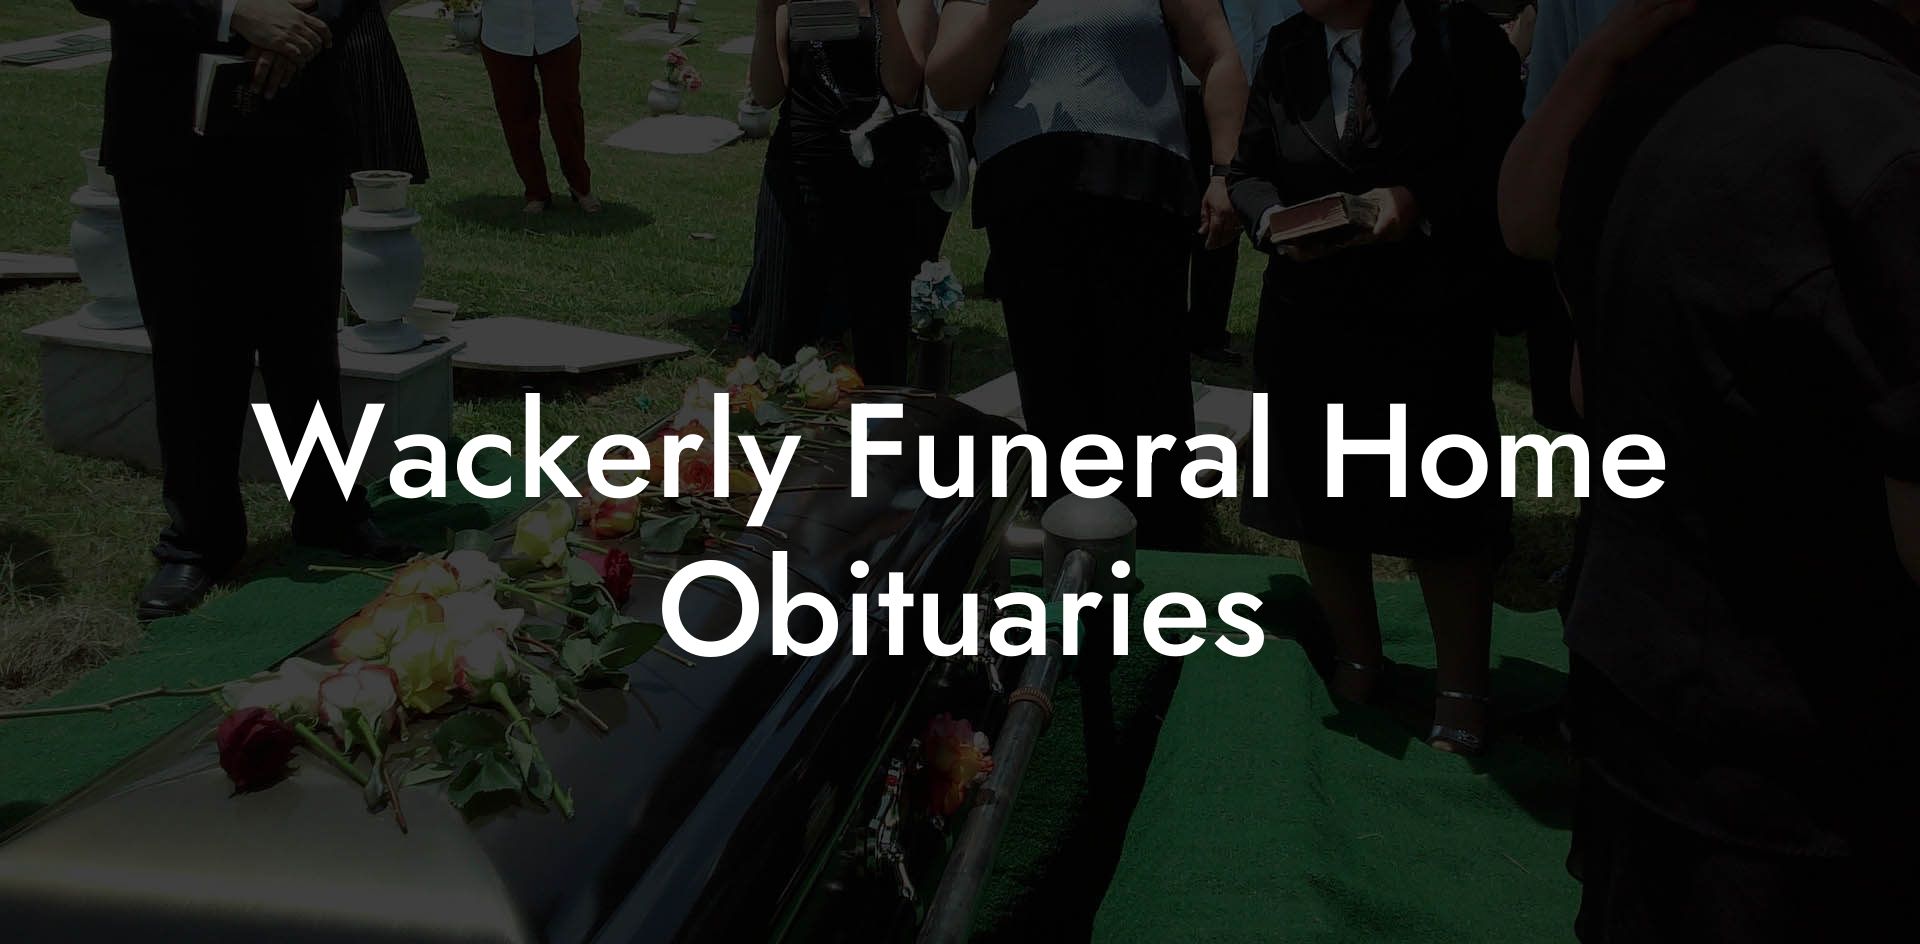 Wackerly Funeral Home Obituaries